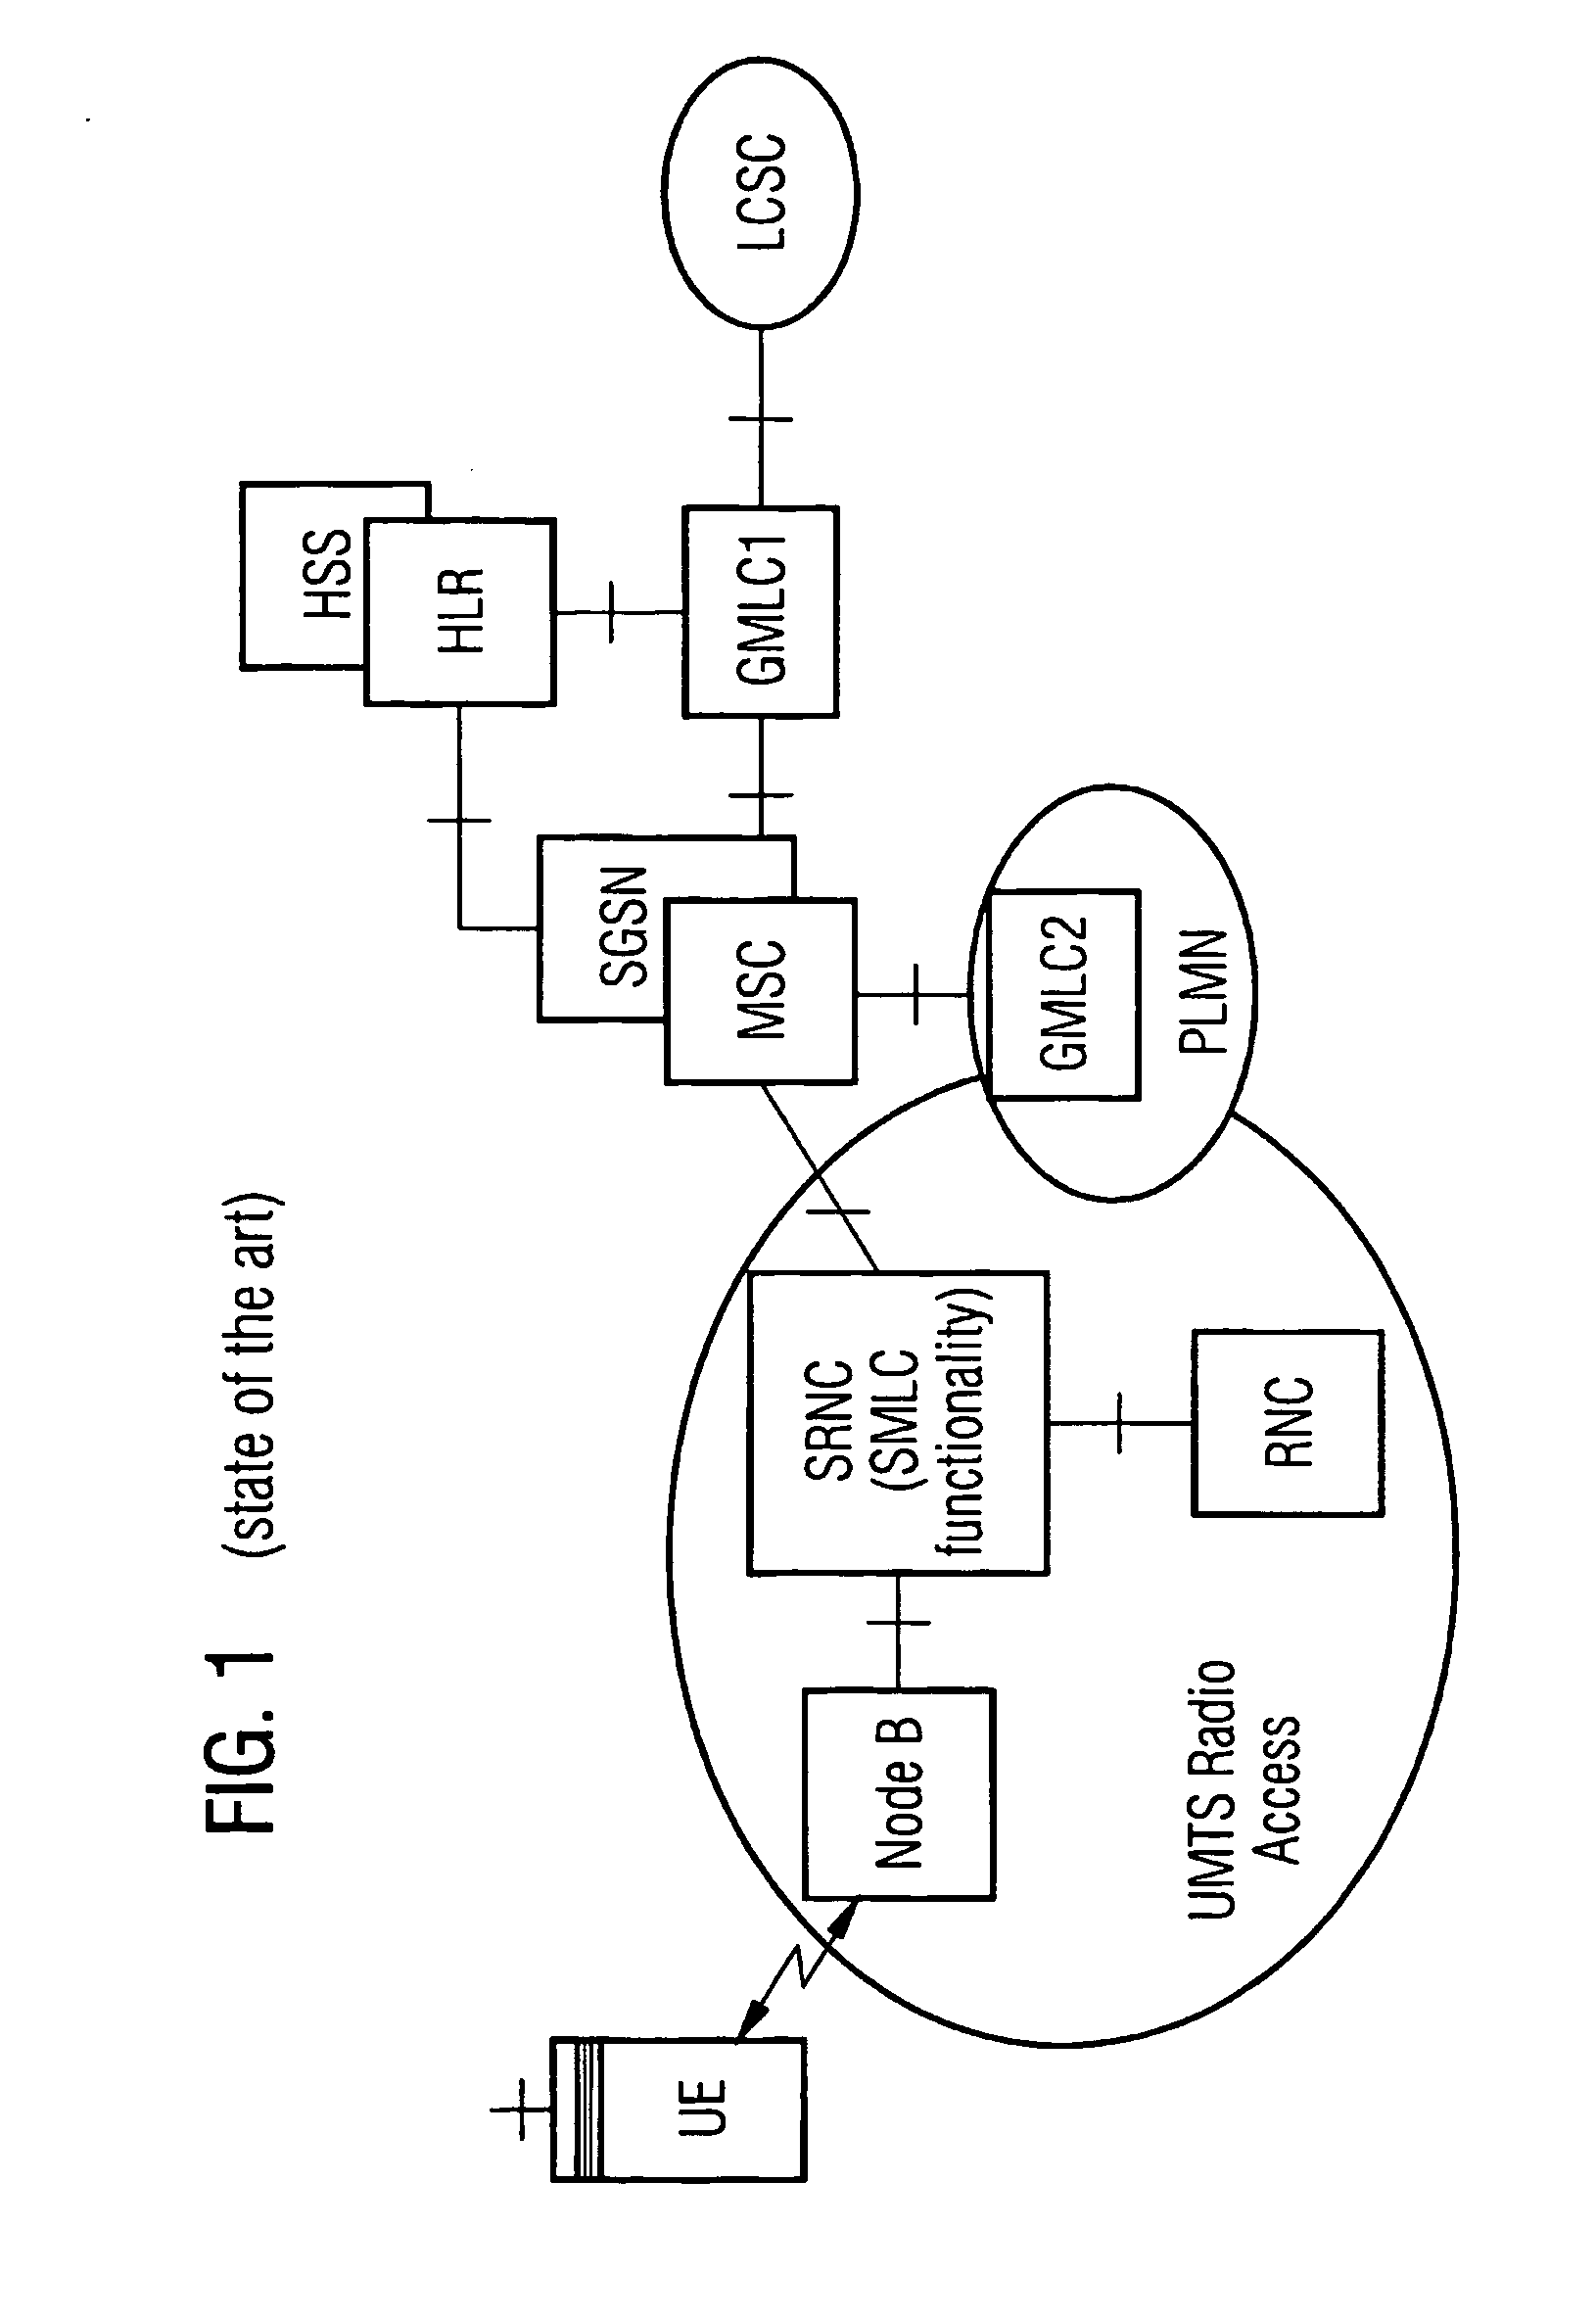 Method for the determination of a receiver for location information